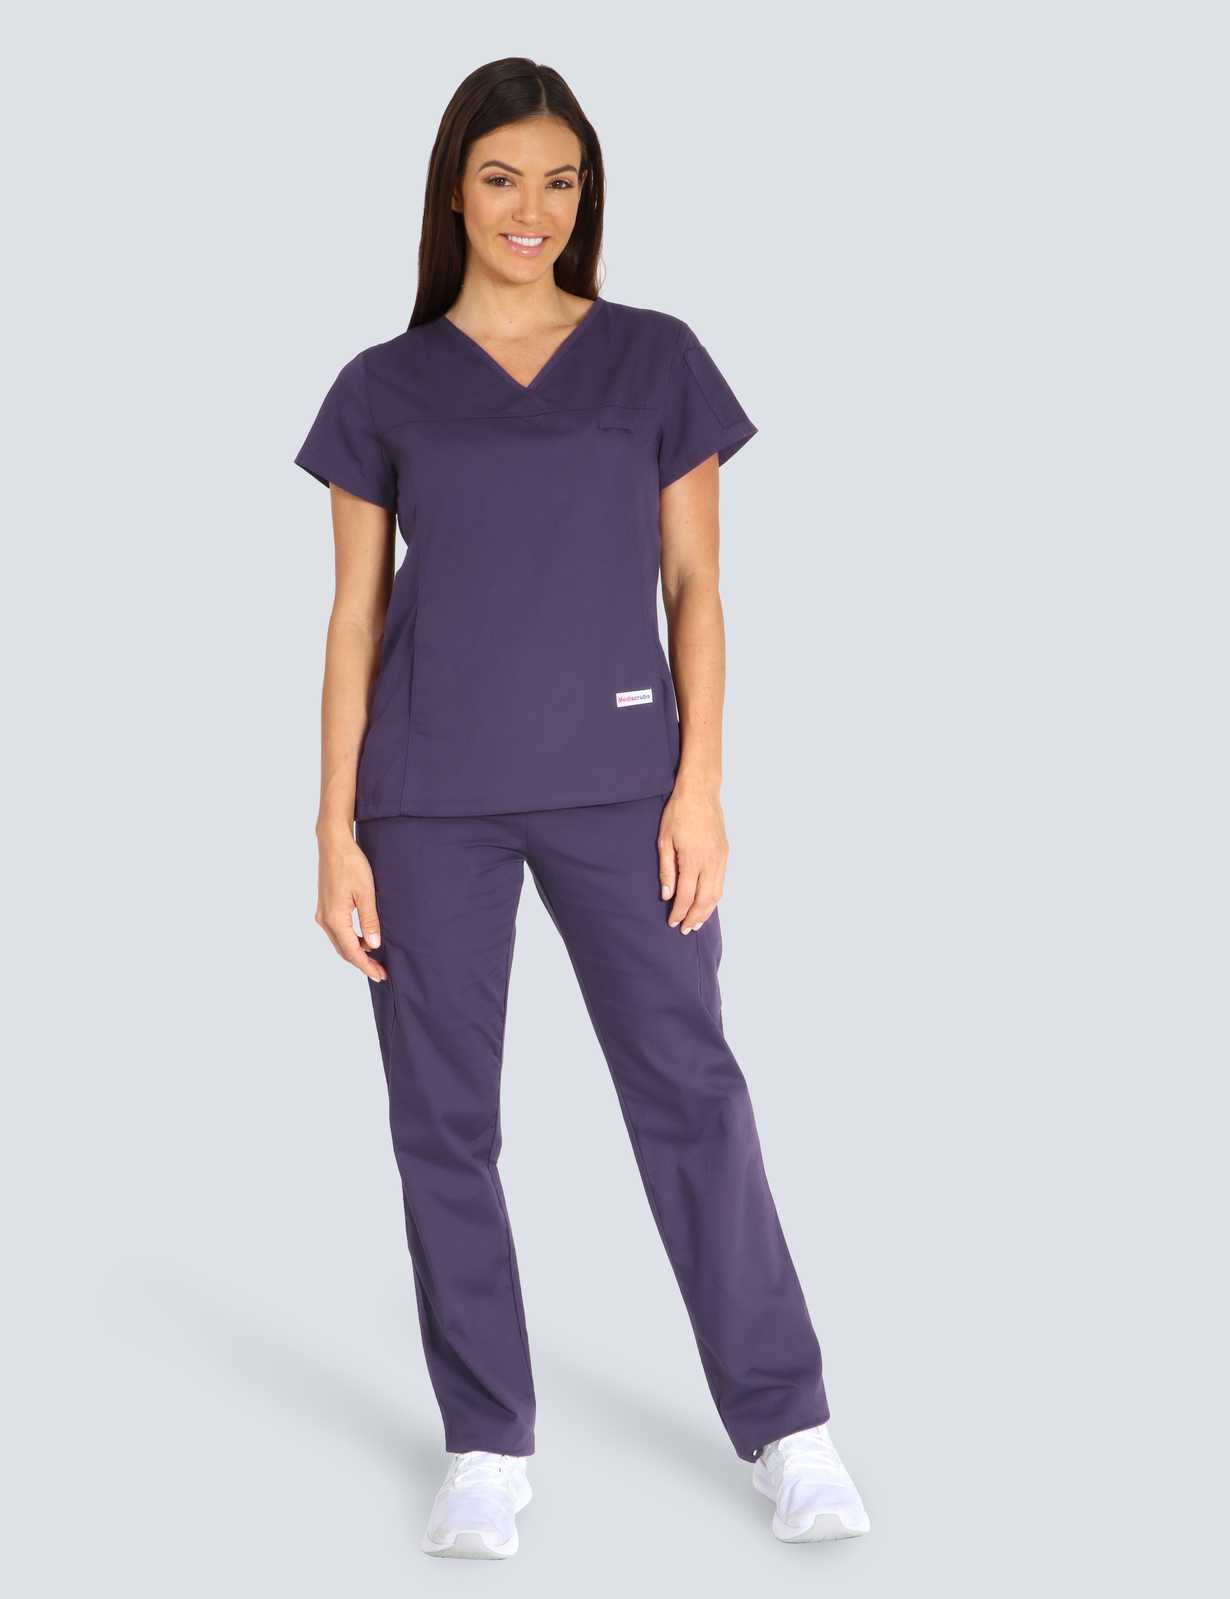 Peninsula Health - Dialysis RN (Women's Fit Solid Scrub Top and Cargo Pants in Aubergine incl Logos)